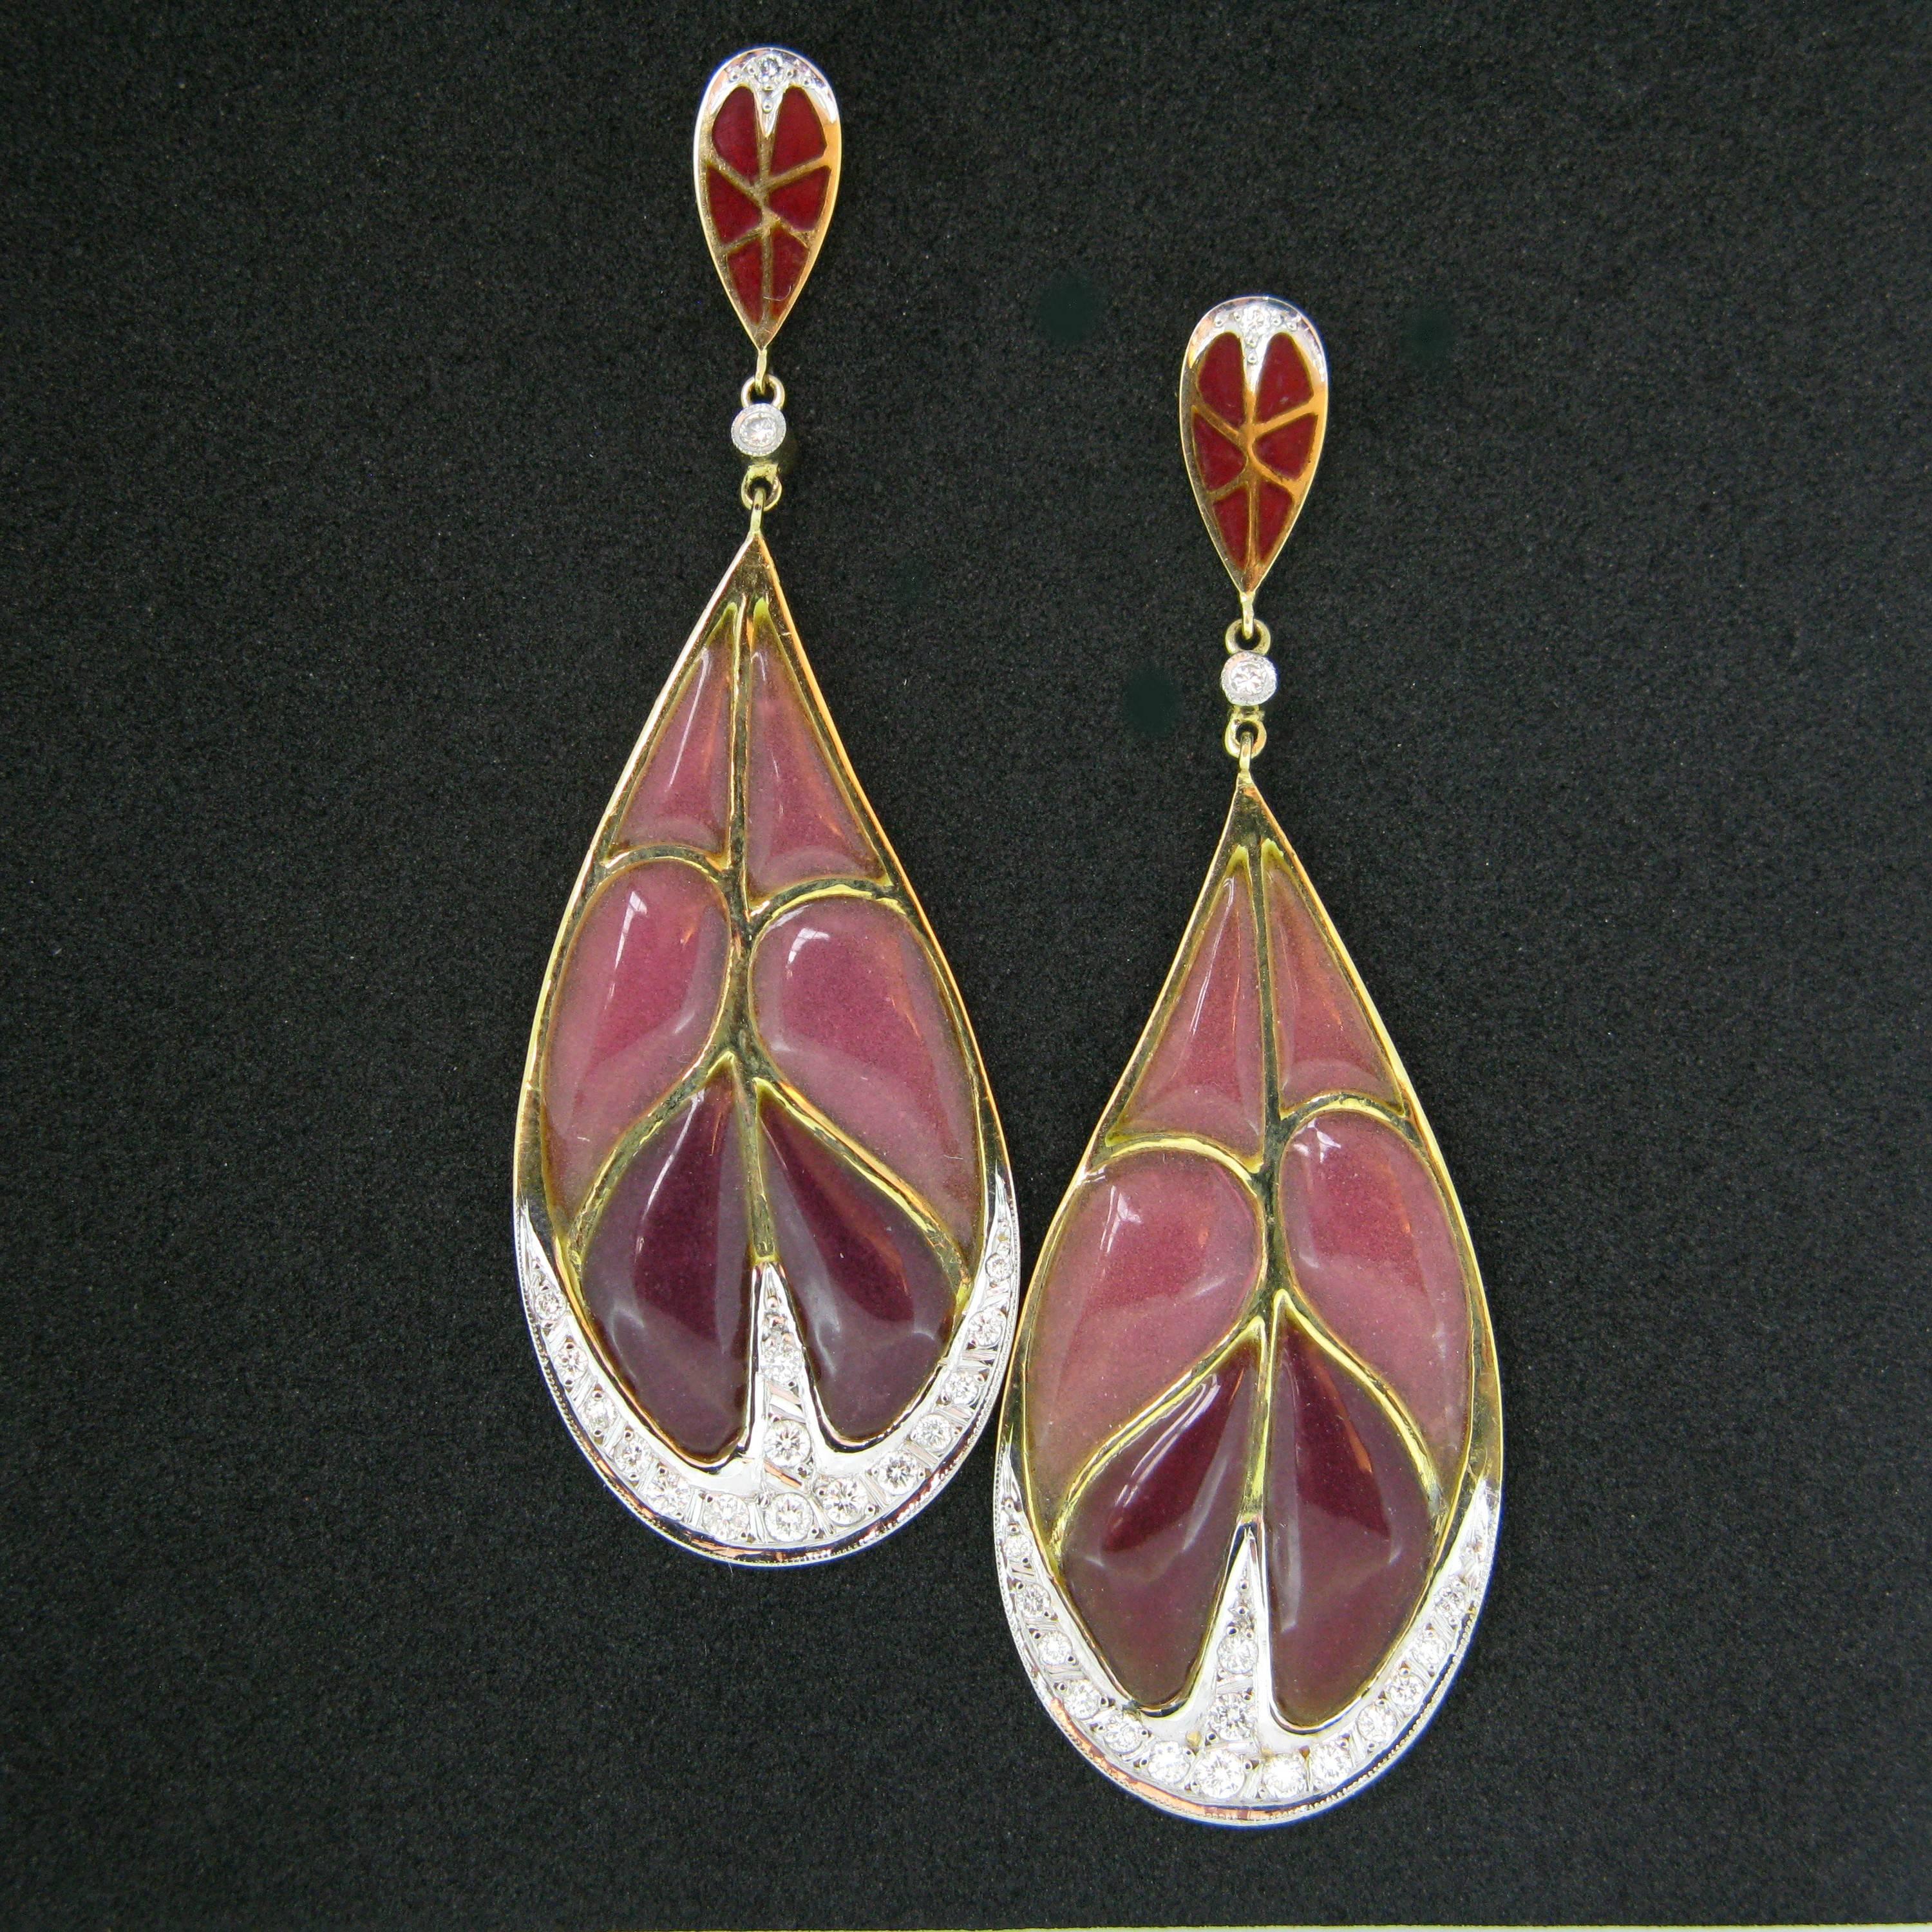 This pair of pendant earrings is very elegant. They are made in 18kt yellow gold; each earring has 17 diamonds situated at the bottom and at the top. Although, these are modern, they have an Art Nouveau style with the pink and red Plique a Jour leaf